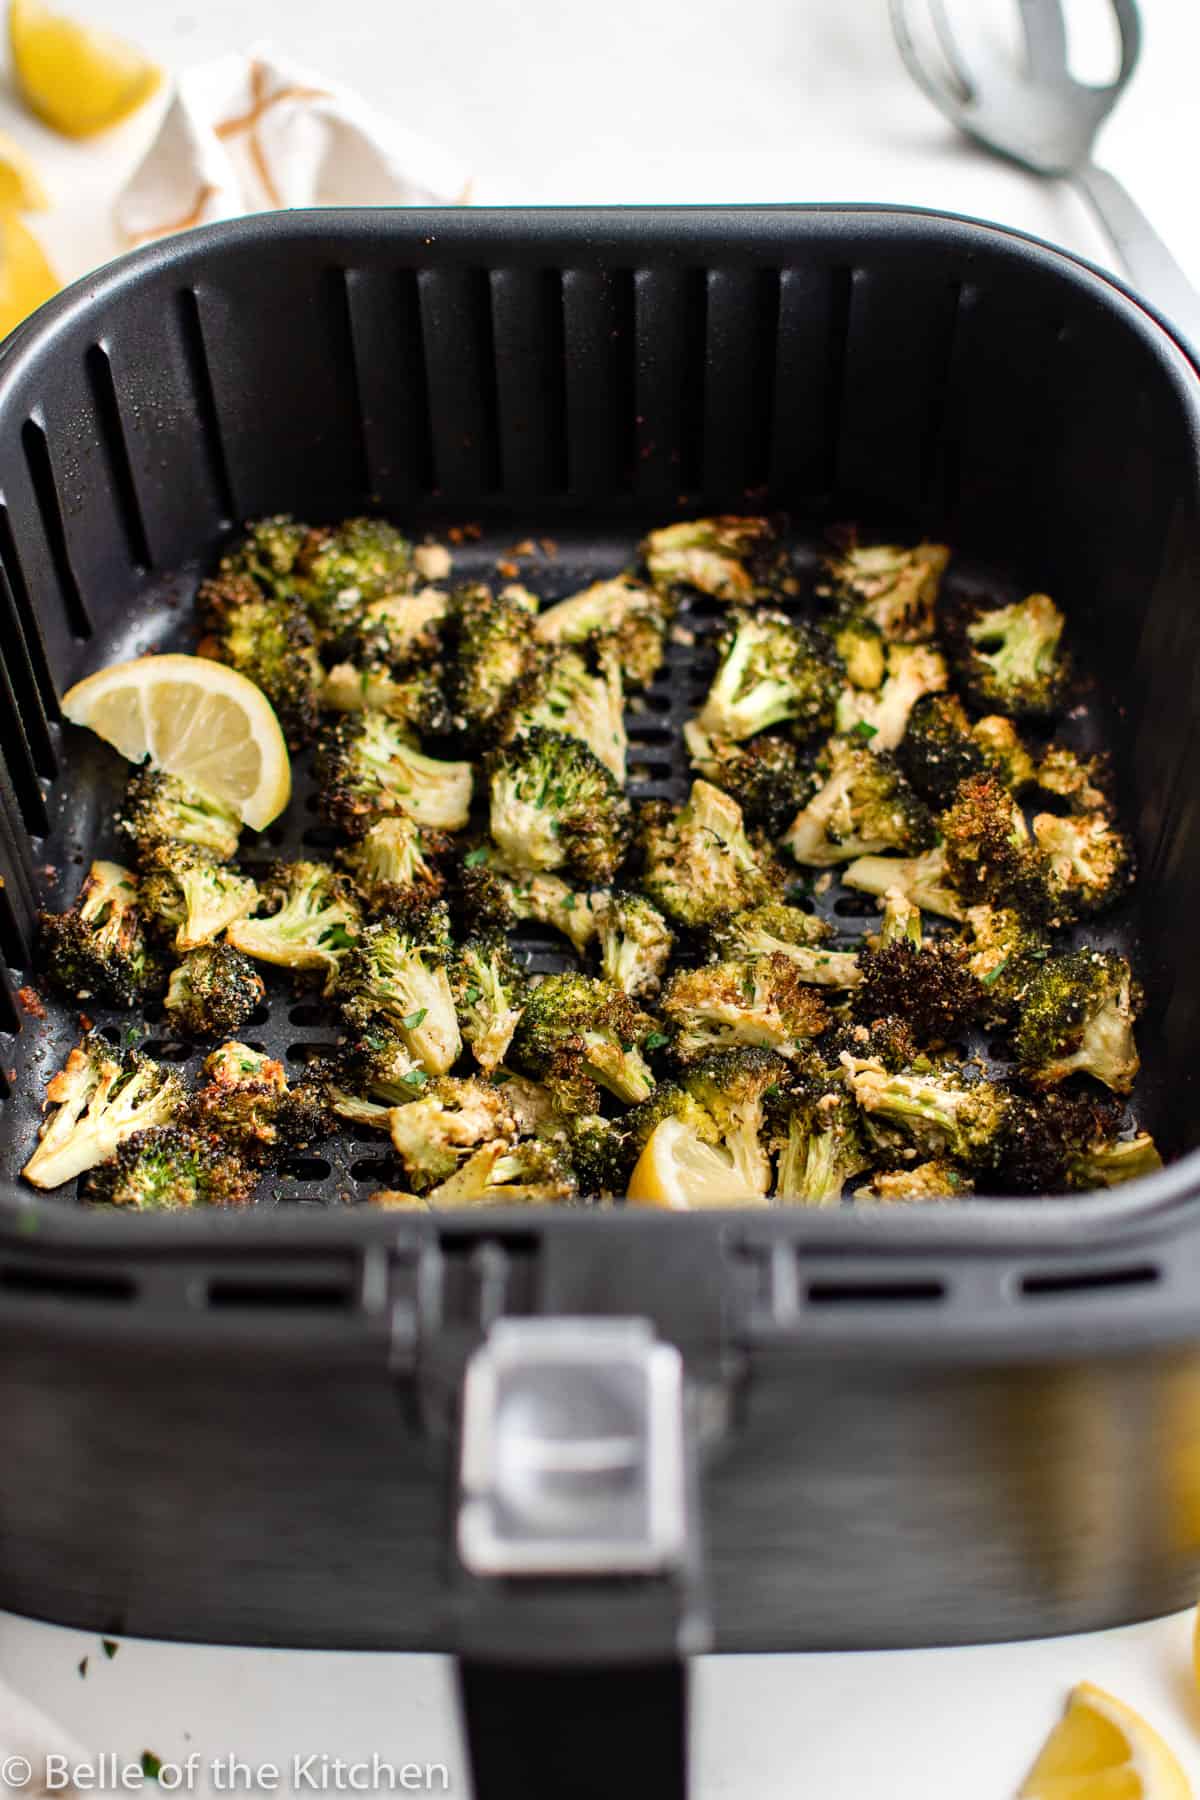 an air fryer basket fall of broccoli and lemon slices.